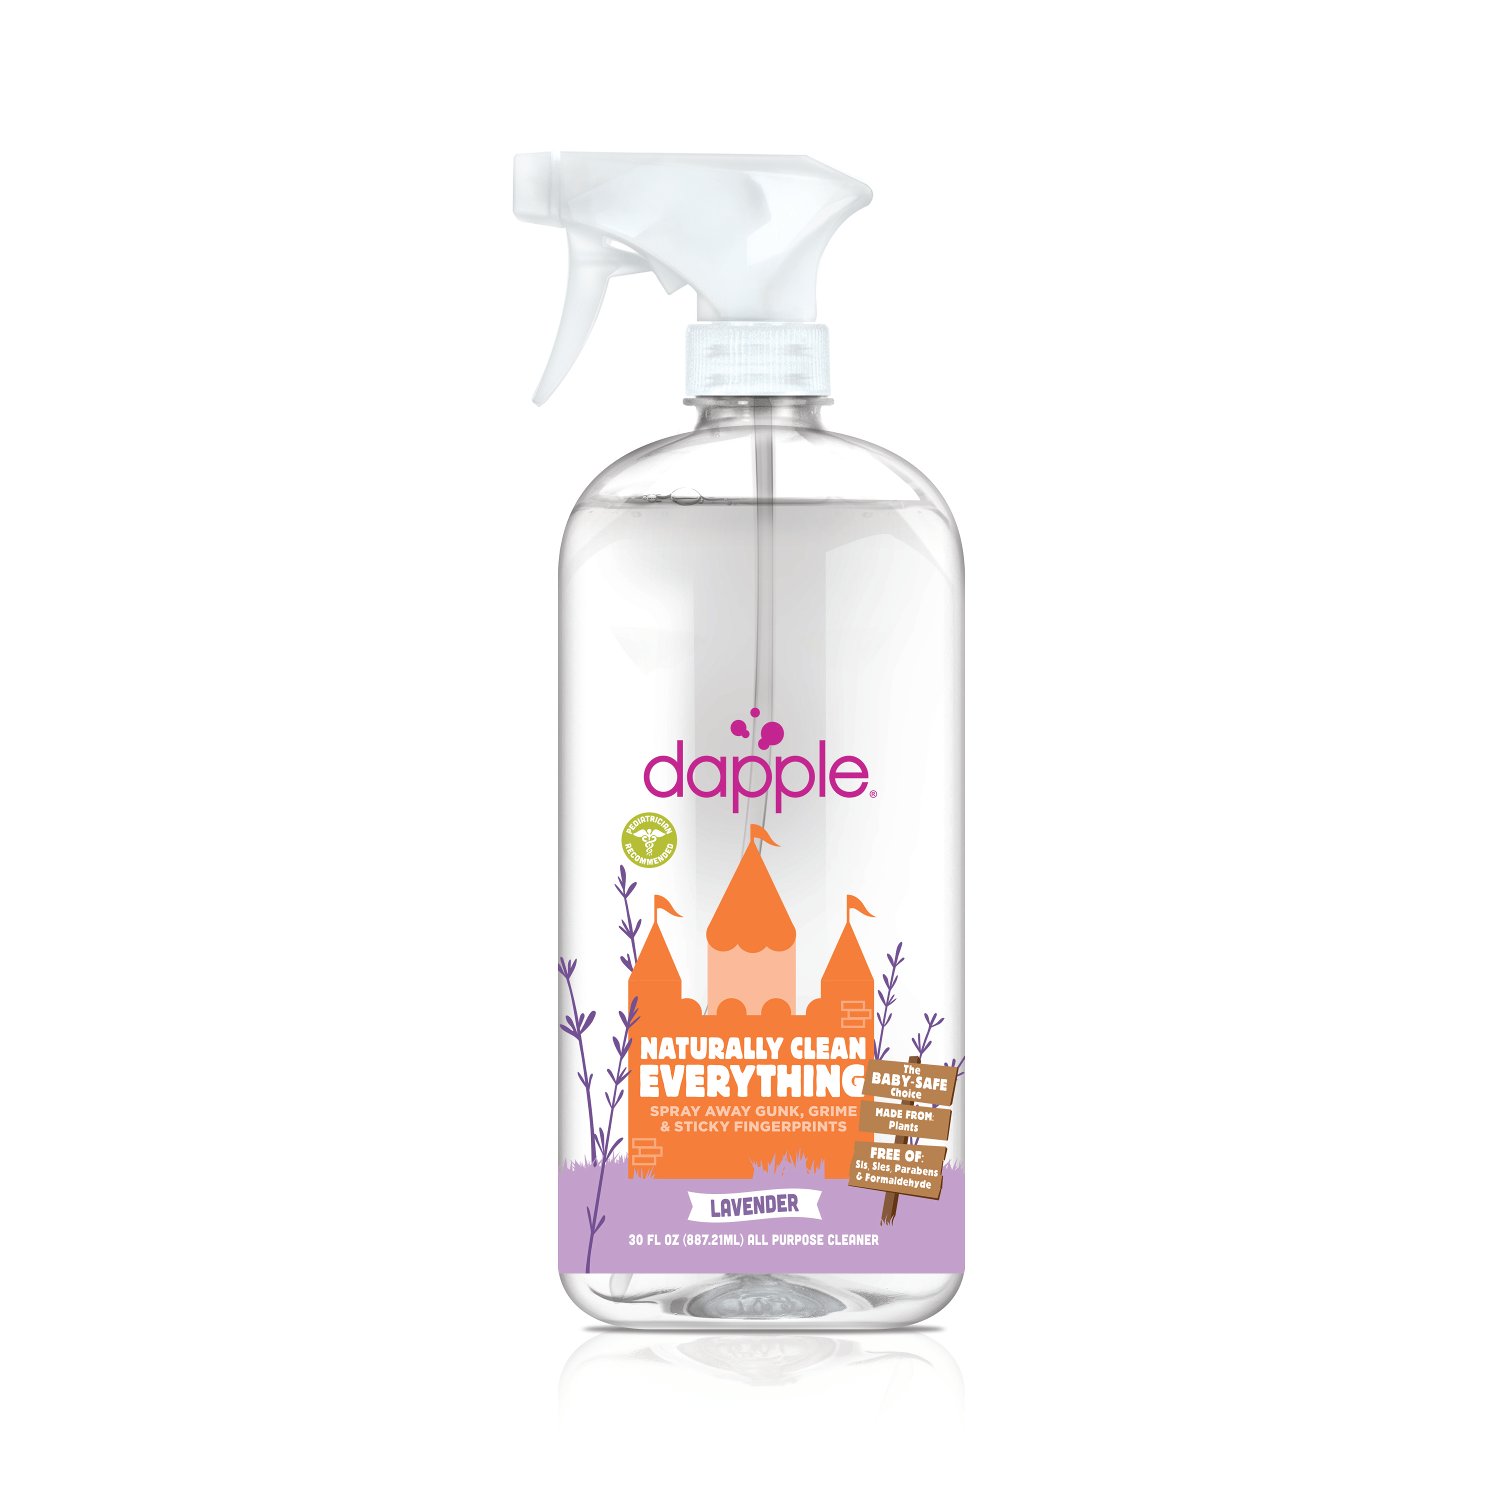 Quirks Marketing Philippines - Dapple - Naturally Clean All Purpose Cleaner